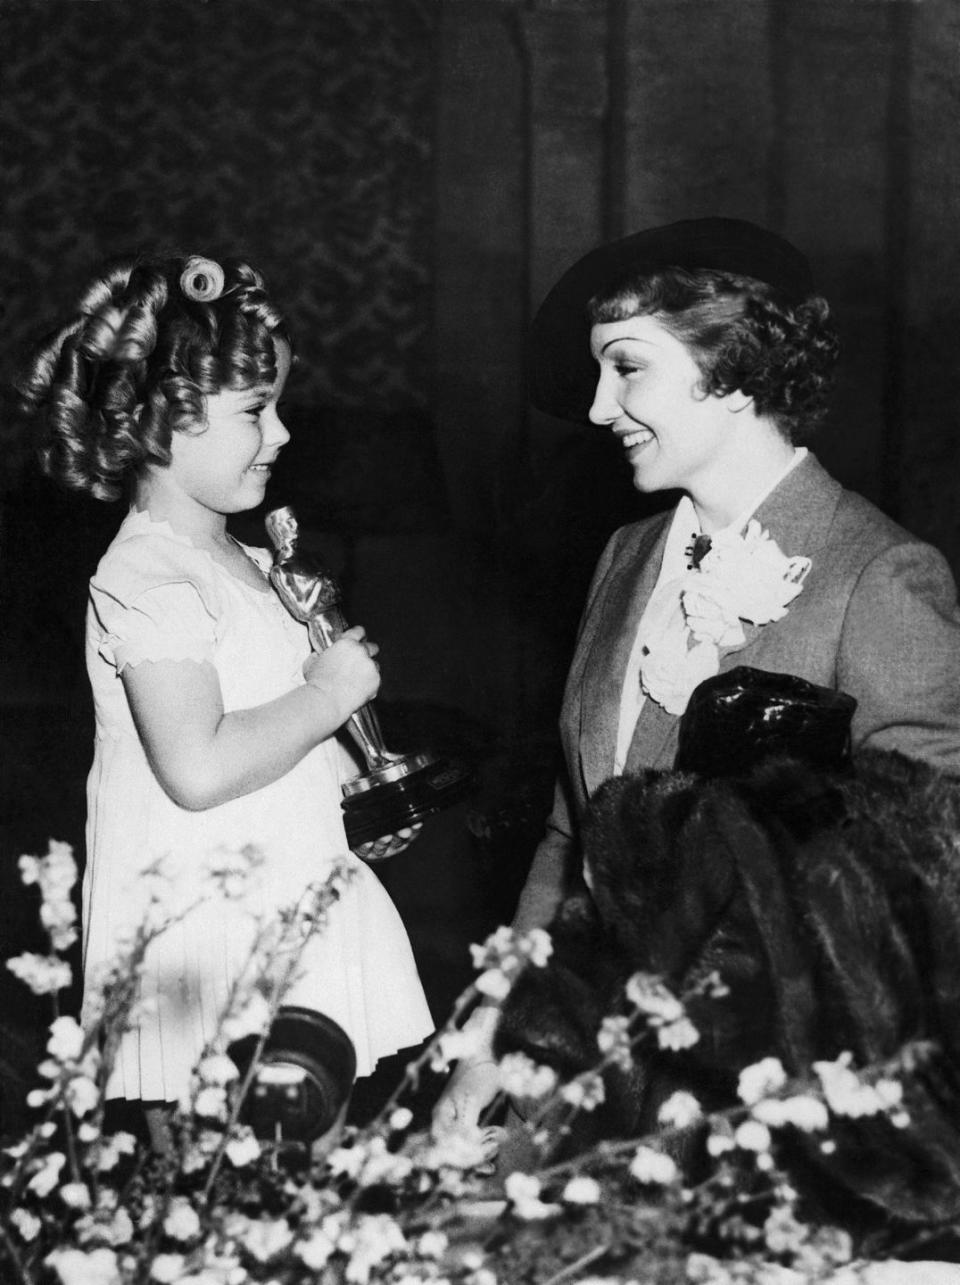 <p>Two massive stars of the era met onstage here when Claudette Colbert won the Academy Award for Best Actress for her performance in the screwball comedy romance <em>It Happened One Night</em> directed by Frank Capra. Presenter Shirley Temple was also awarded a mini Oscar statue in honor of her work as a child actress.</p>